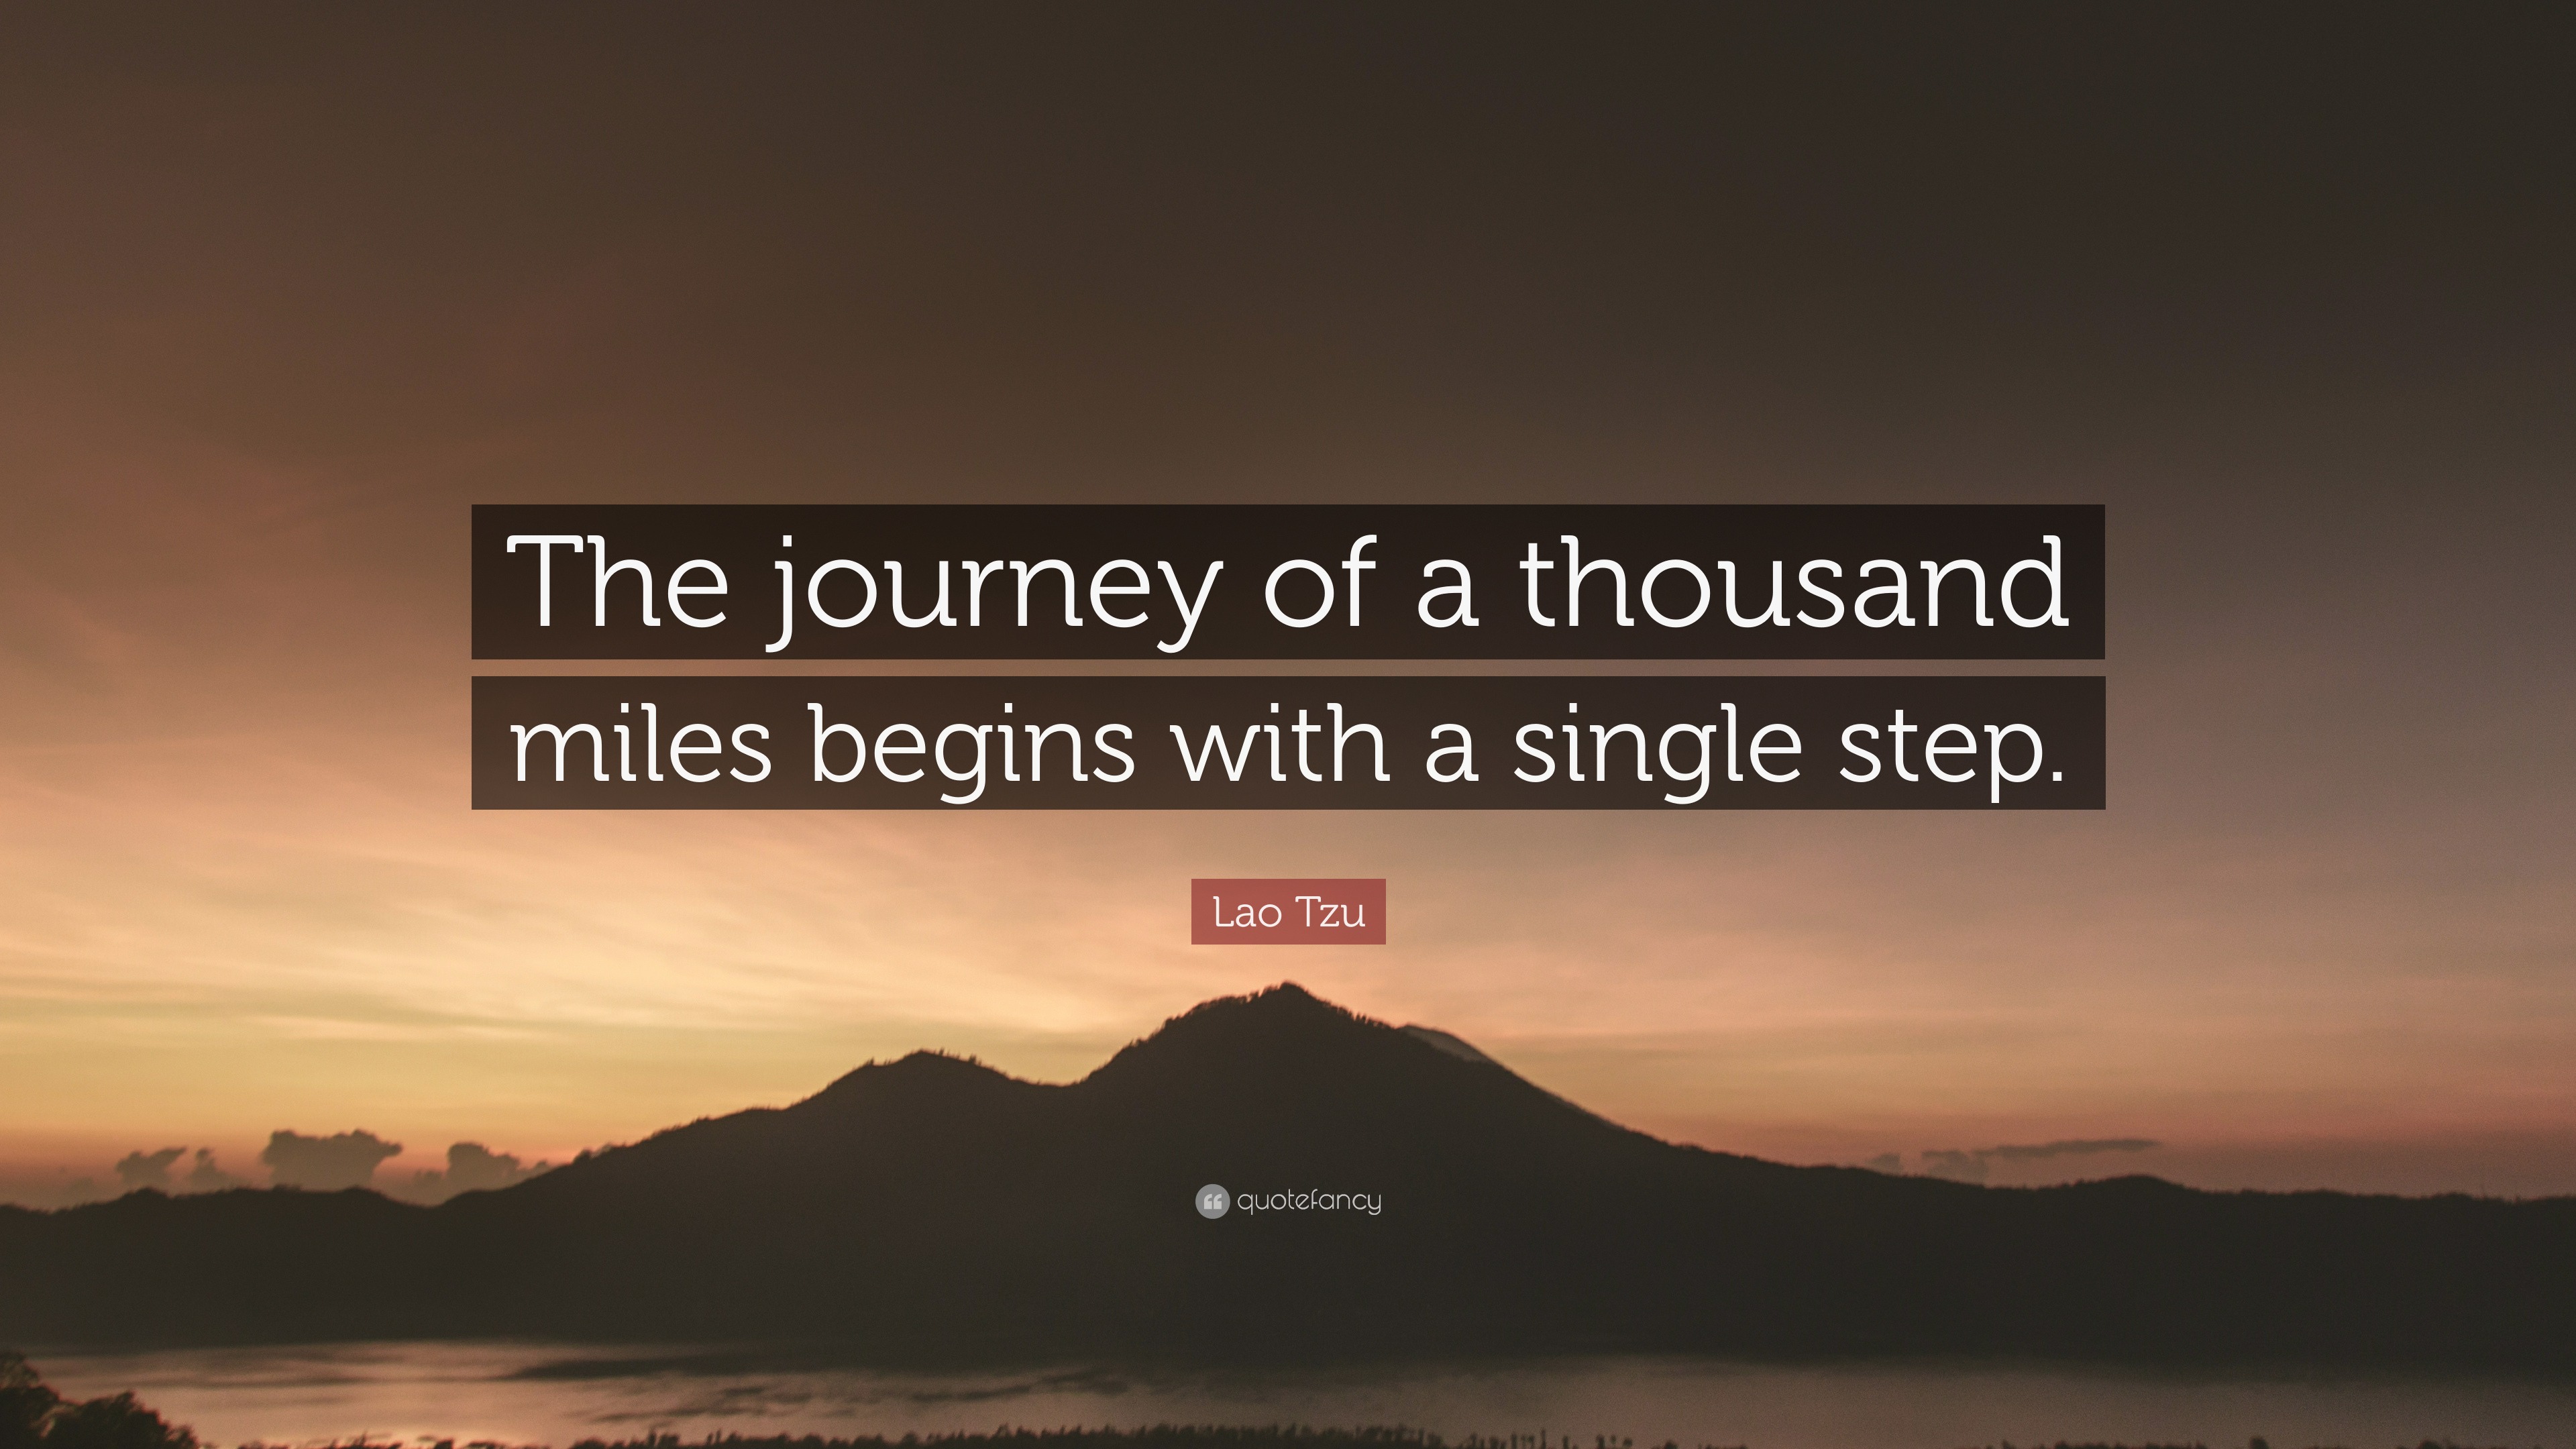 quote about a journey of a thousand miles